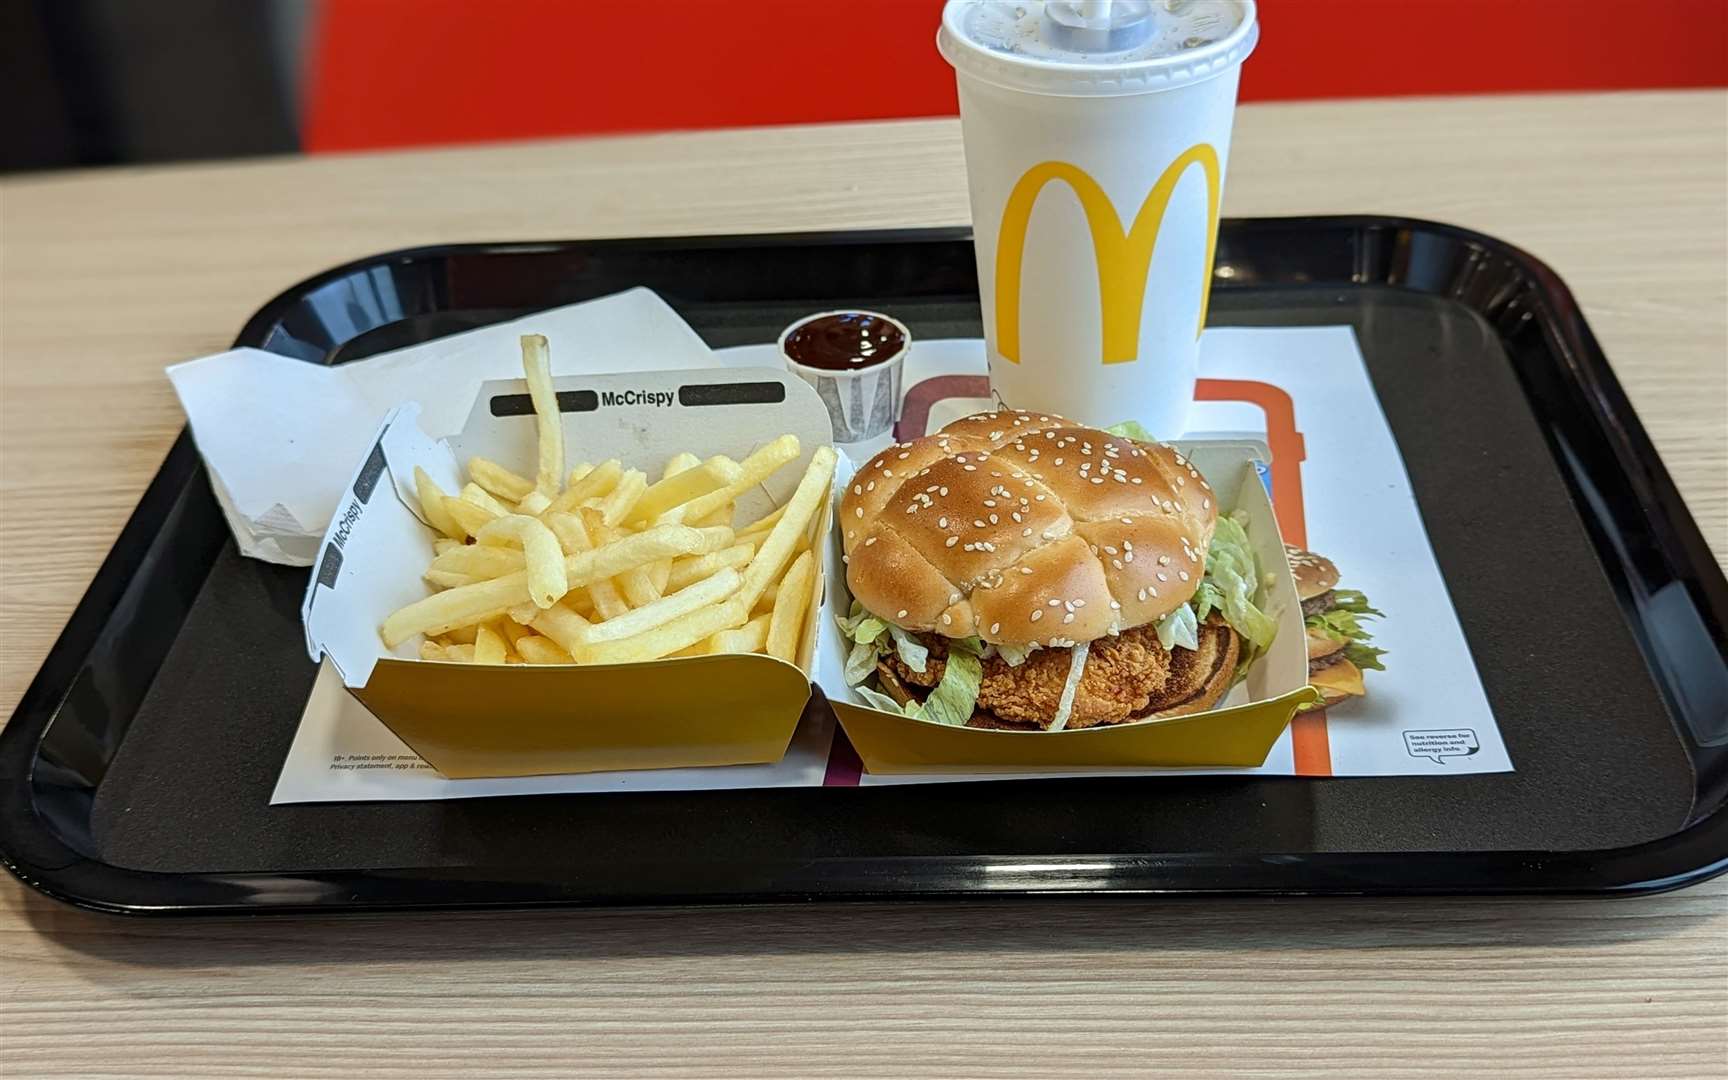 McDonald’s has made big changes to its packaging in recent years